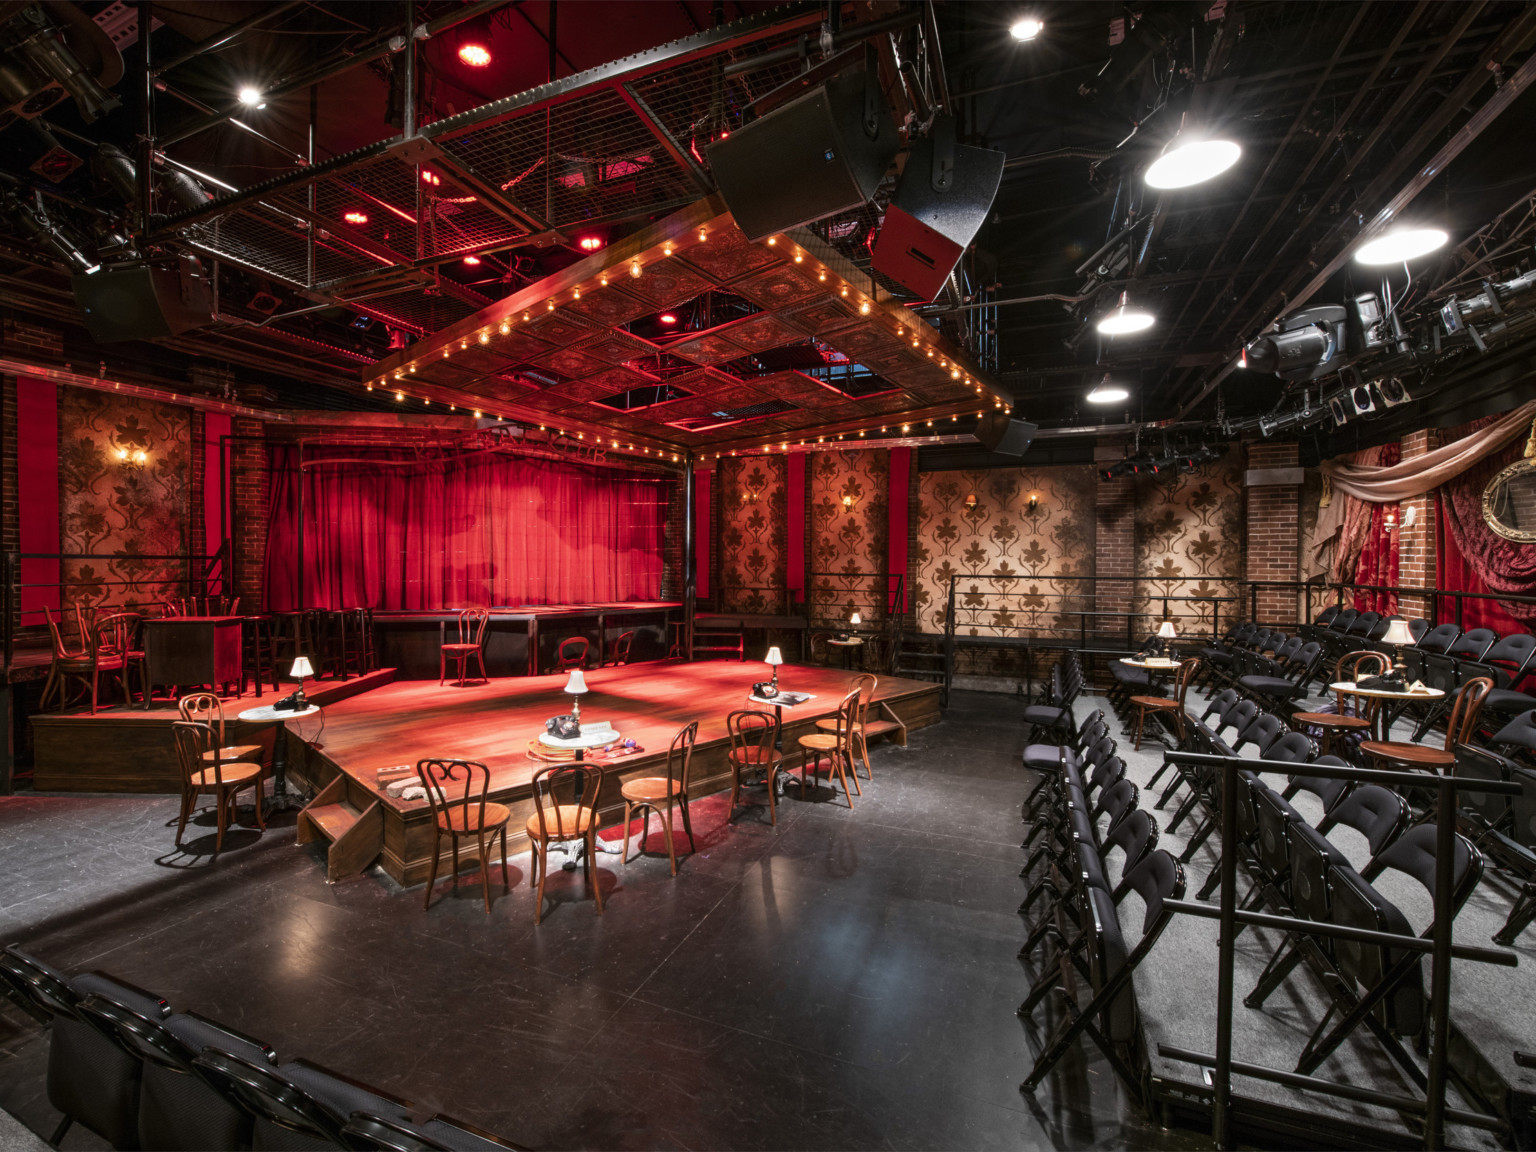 A black box theater with exposed fly system and light fixtures, the stage is set with tables and chairs